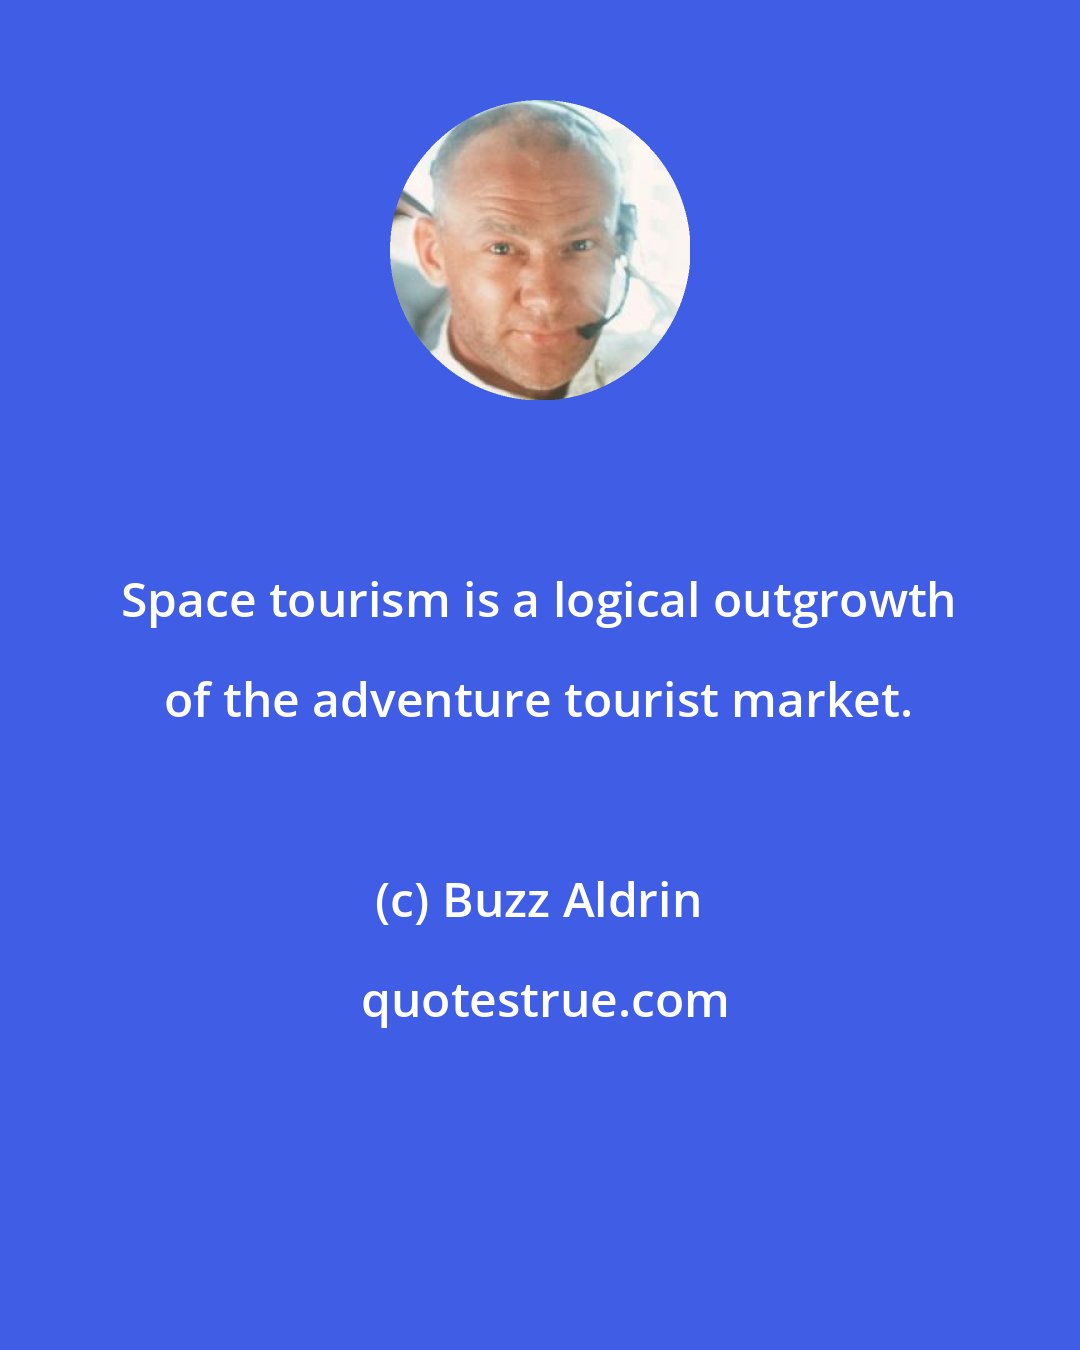 Buzz Aldrin: Space tourism is a logical outgrowth of the adventure tourist market.